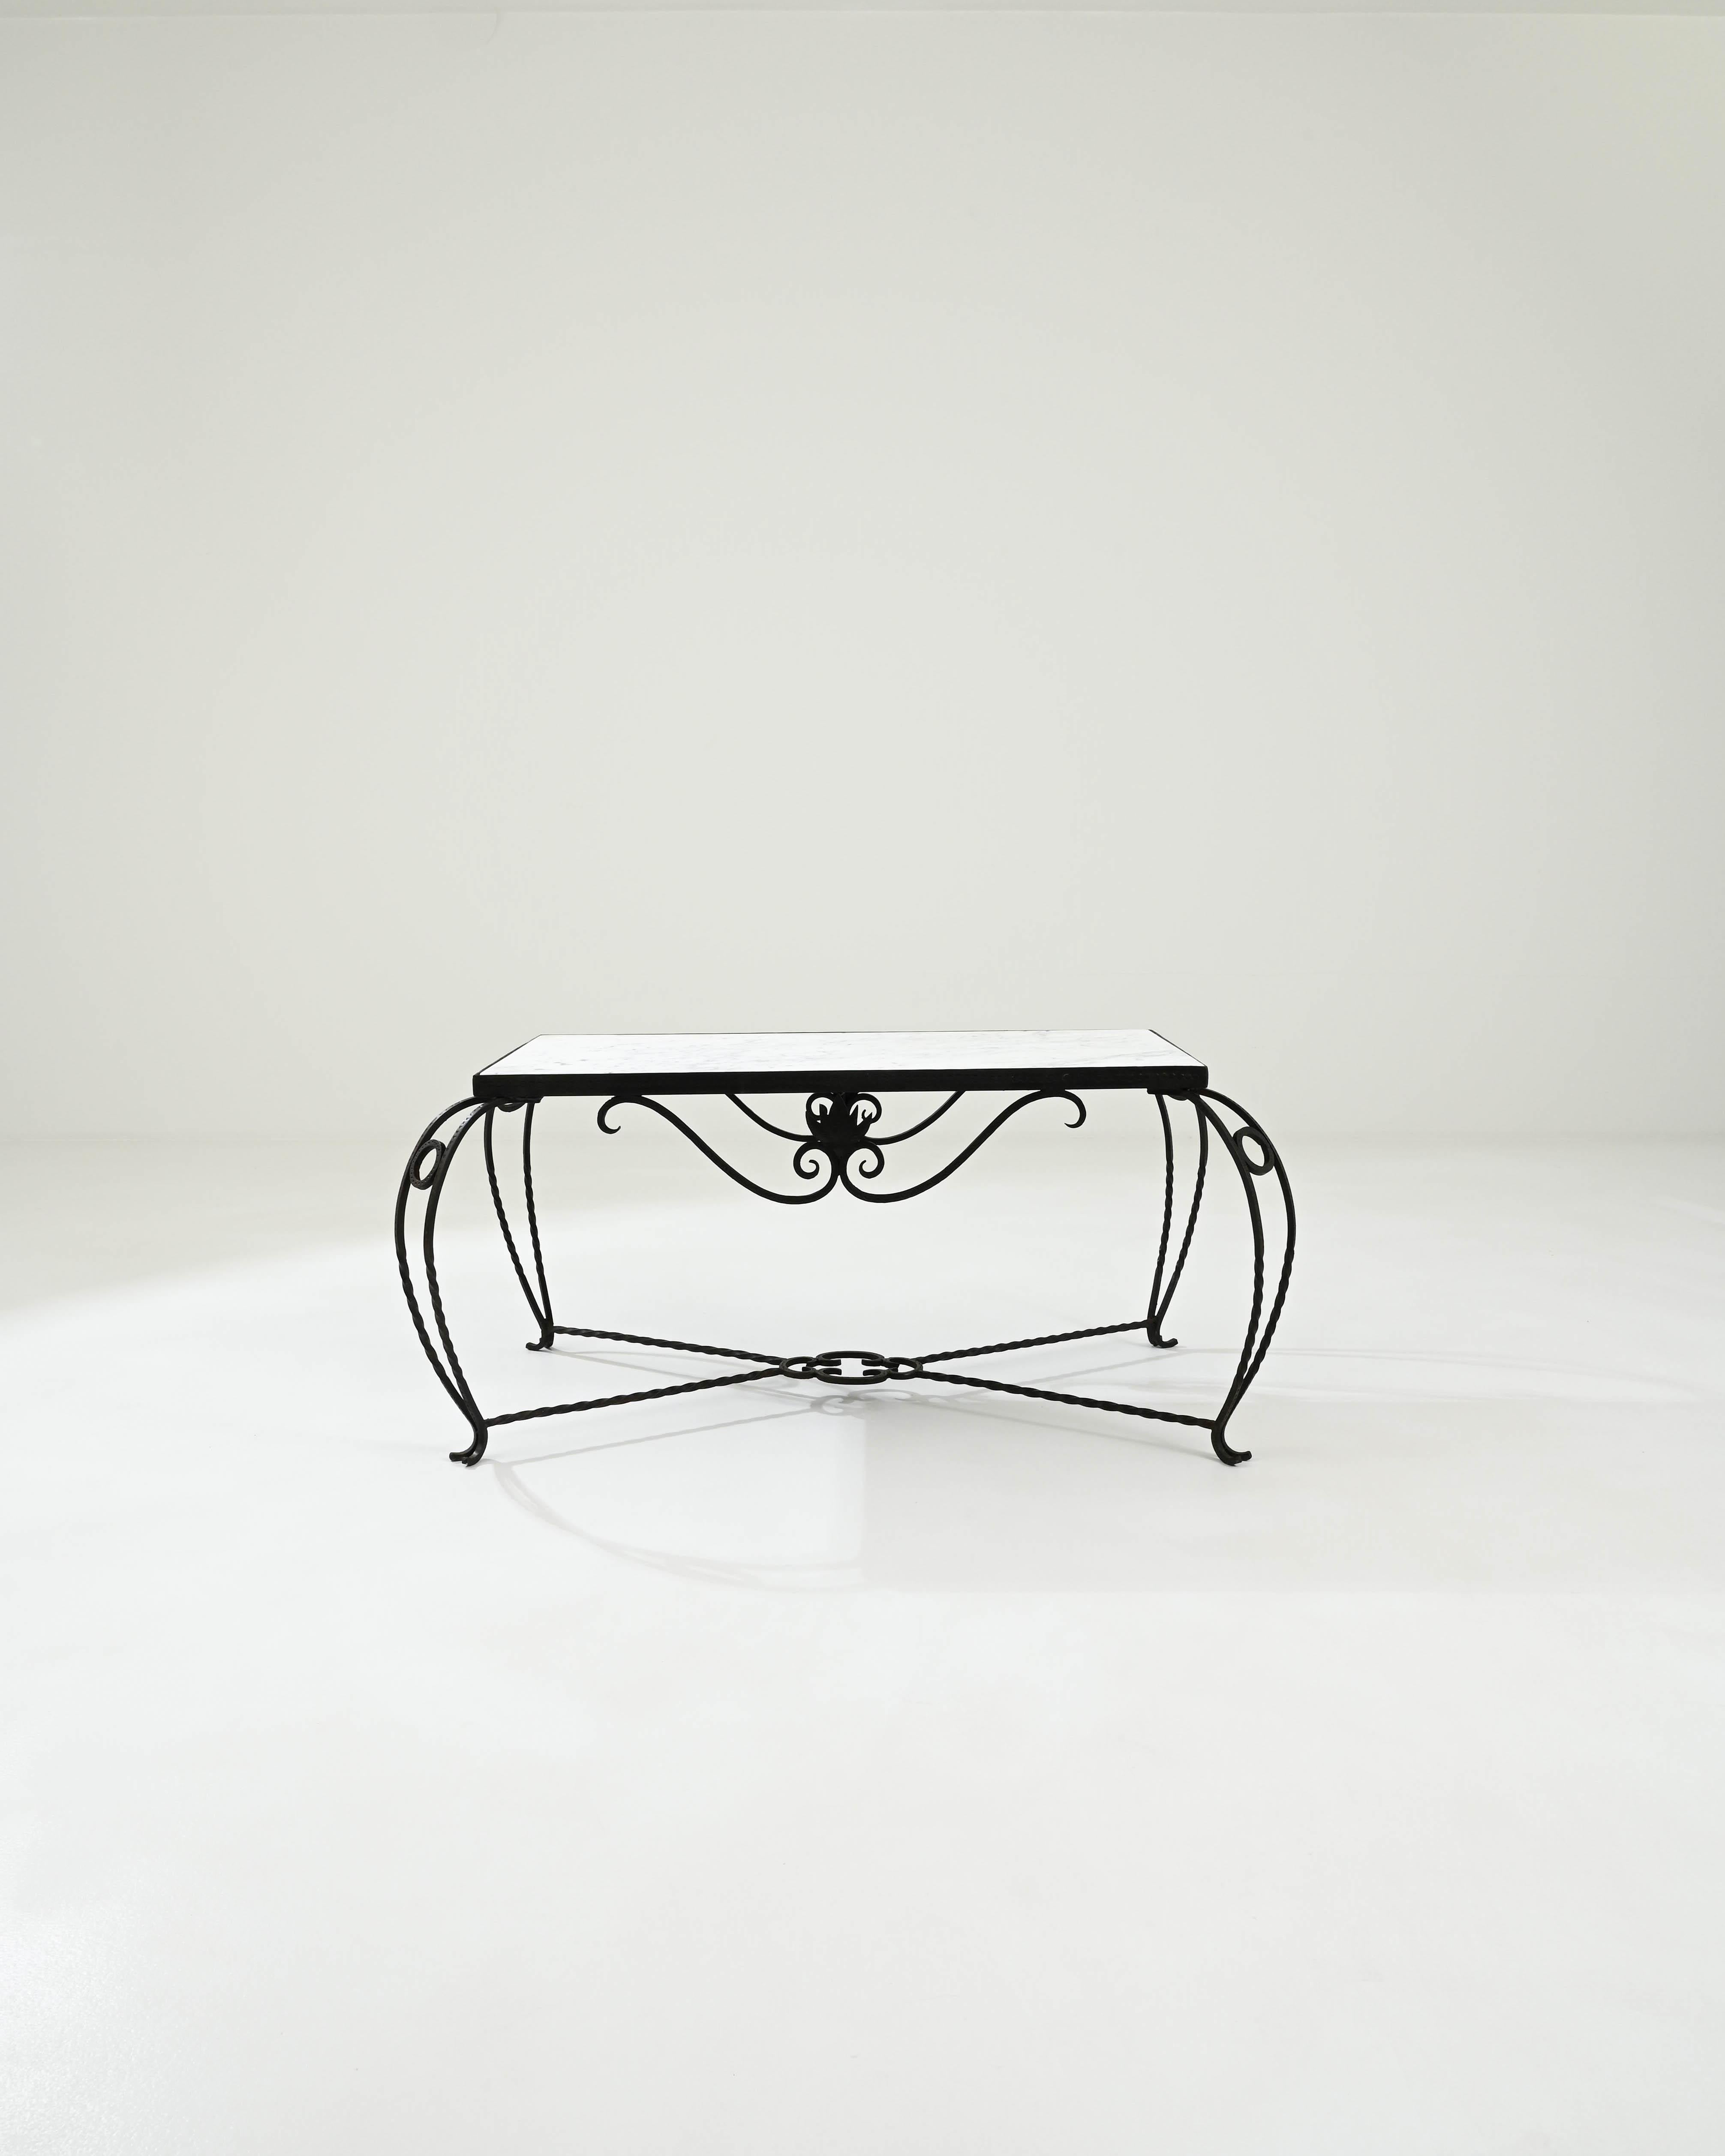 This exquisite coffee table was made in 20th-century France.The elaborate detailing of the wrought iron base interplays with the luxurious white marble tabletop, which features ethereal patterns reminiscent of clouds in the sky. Combined with the